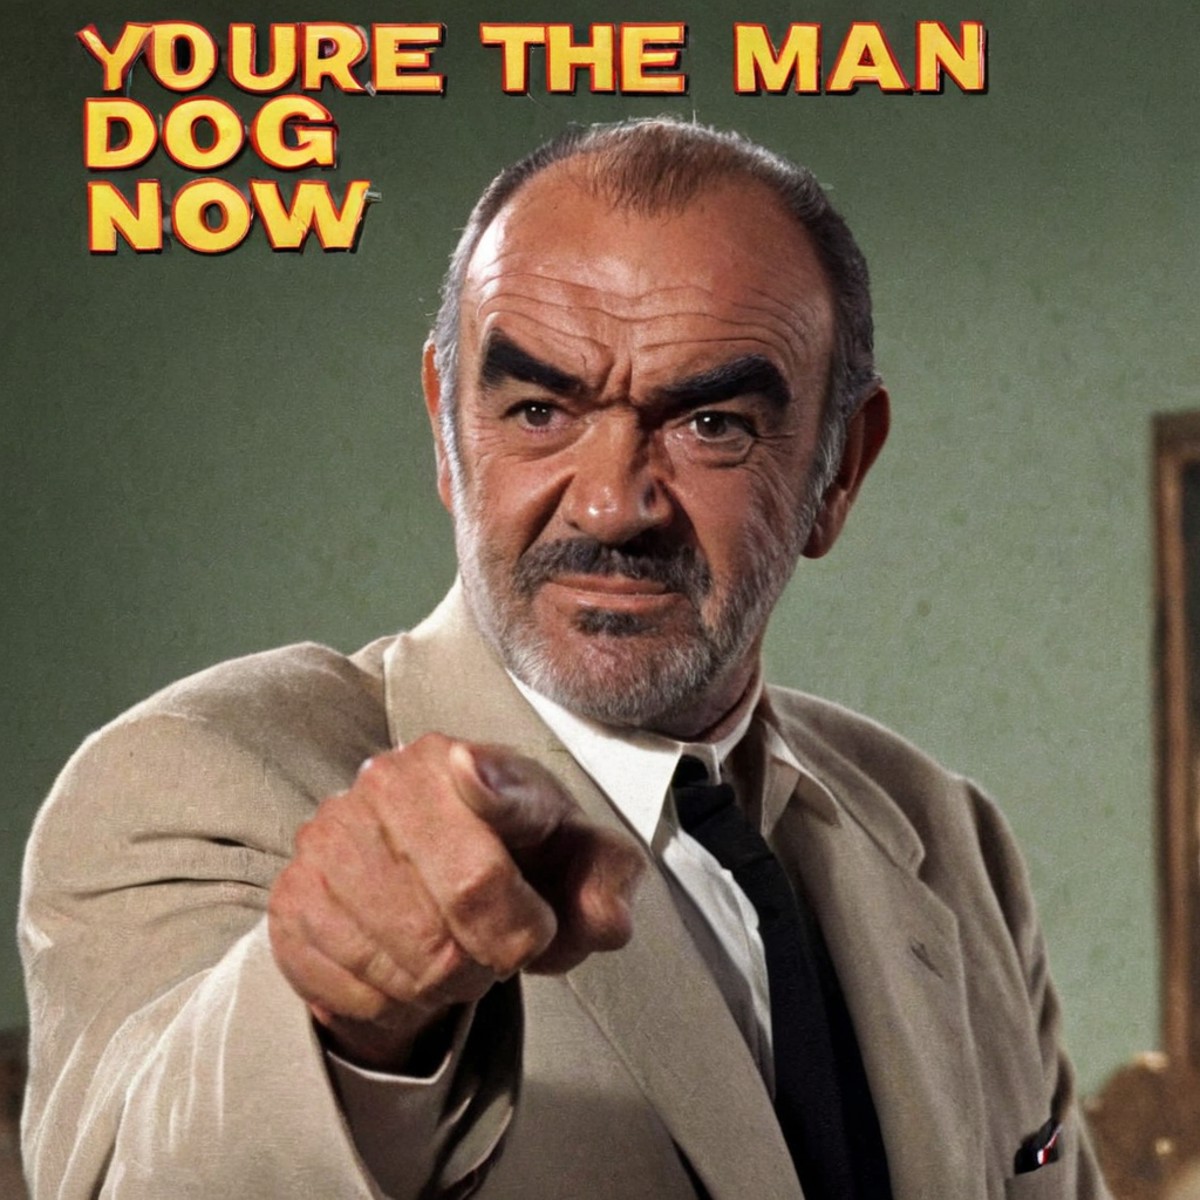 (YOU'RE THE MAN NOW DOG text logo) photo of Sean Connery pointing at viewer <lora:Harrlogos_v1.1:1>